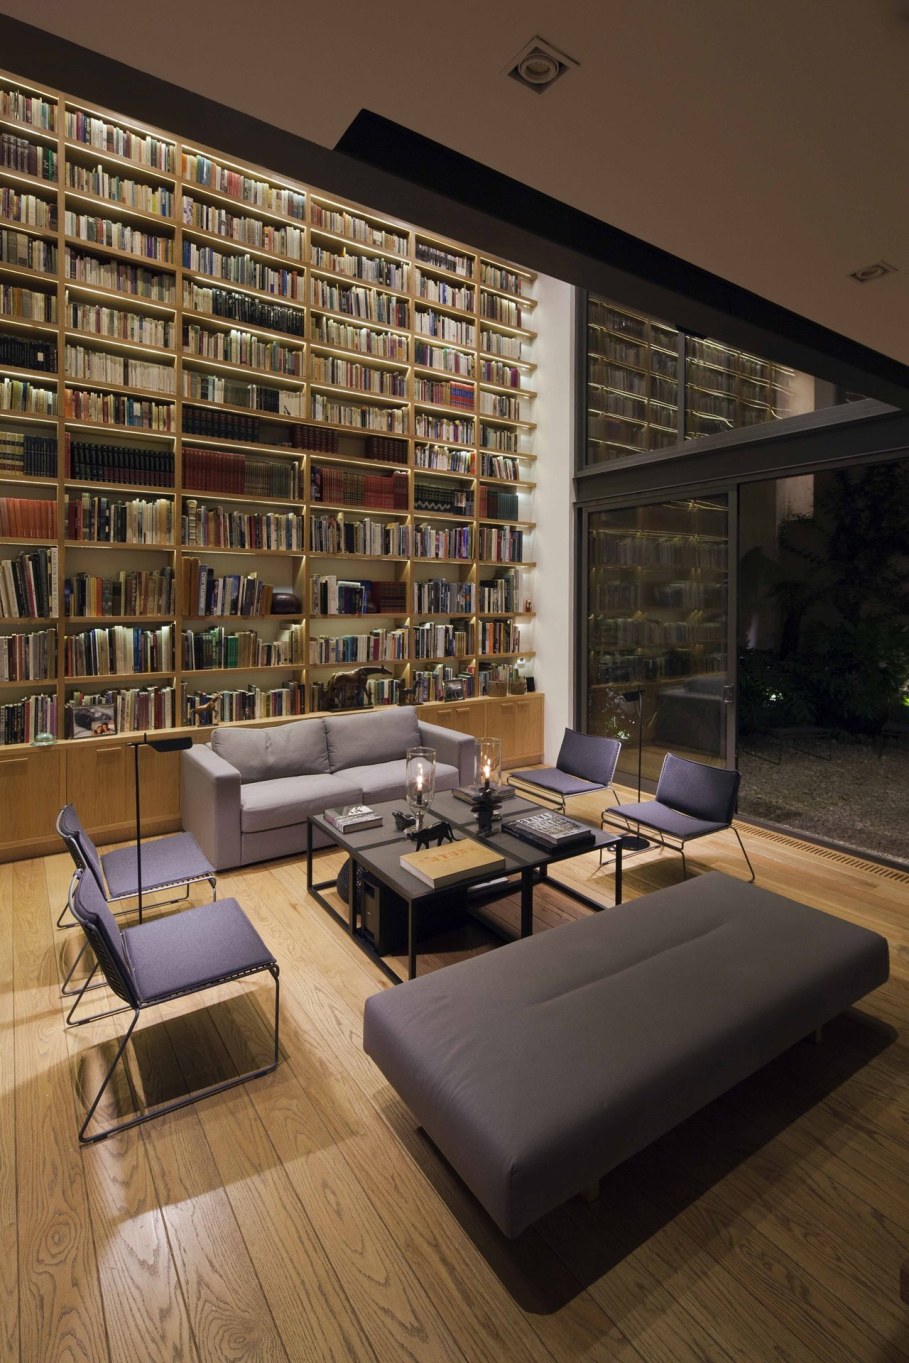 Four Patio House in Mexico by Andres Stebelski arquitecto - Living room with library